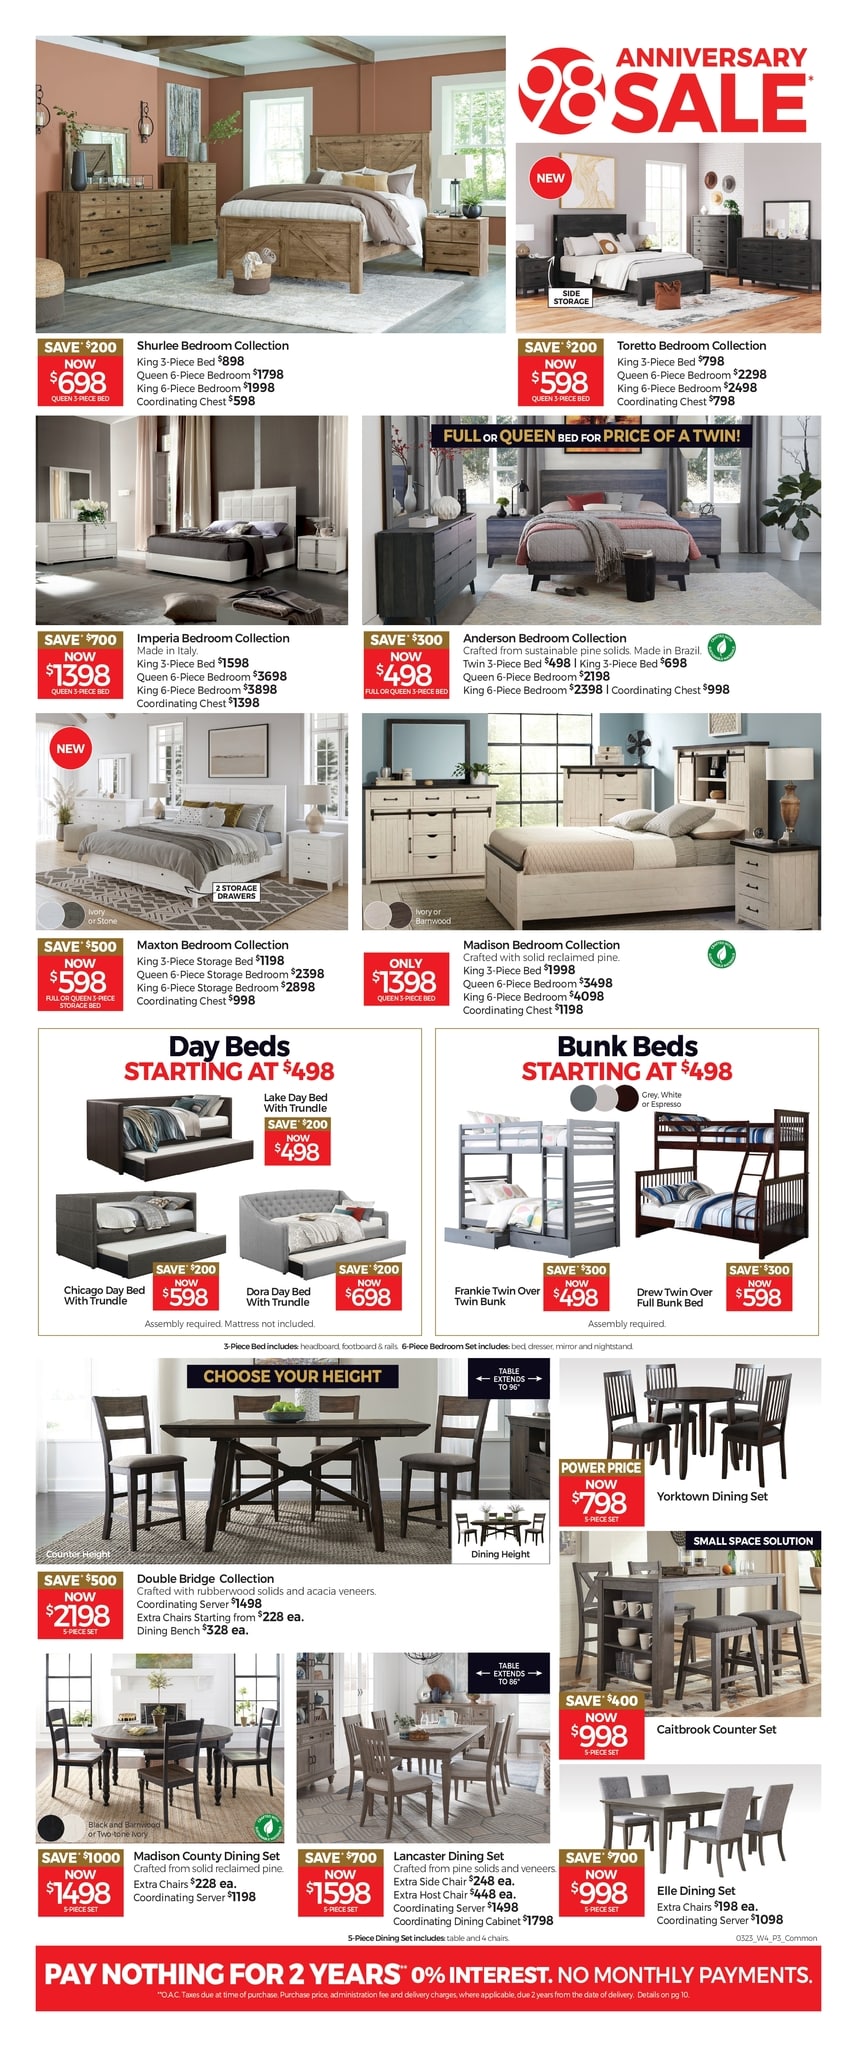 Tepperman's - Weekly Flyer Specials - Page 3